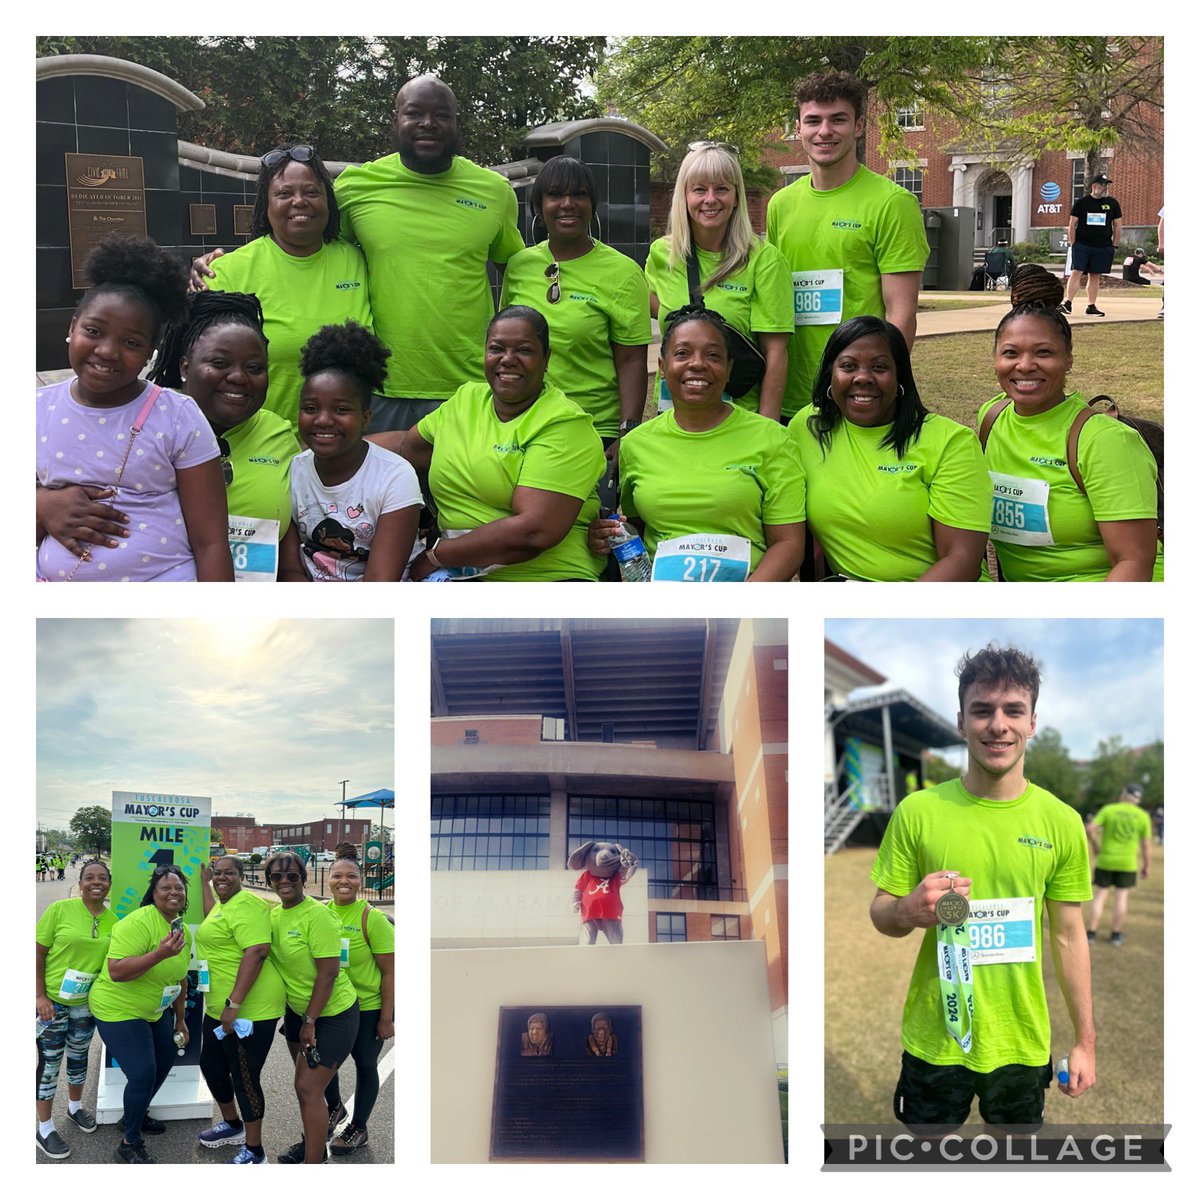 Team Oakdale was ready today to support Pre-K at the Mayors Cup! 🏃🏾‍♀️🏆 @tuscaloosacity @TCSBoardofEd @Lucy80439132